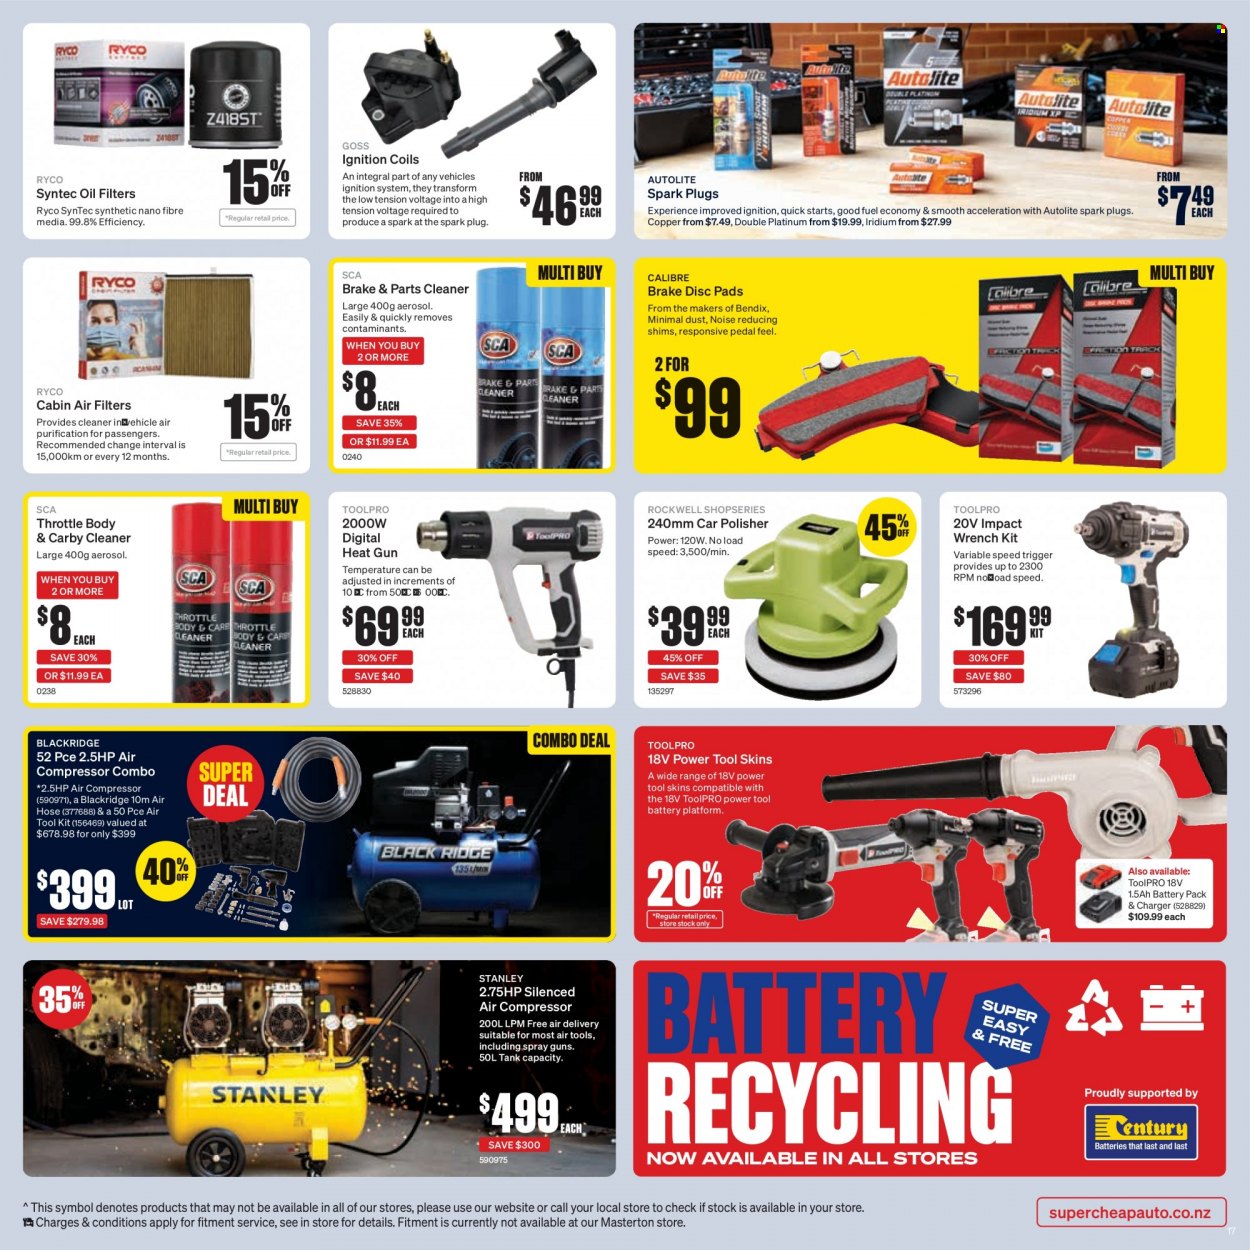 thumbnail - SuperCheap Auto mailer - 01.12.2022 - 11.12.2022 - Sales products - cleaner, battery platform, Stanley, wrench, tool set, air compressor, air hose, tank, air filter, spark plugs, oil filter, cabin filter. Page 18.